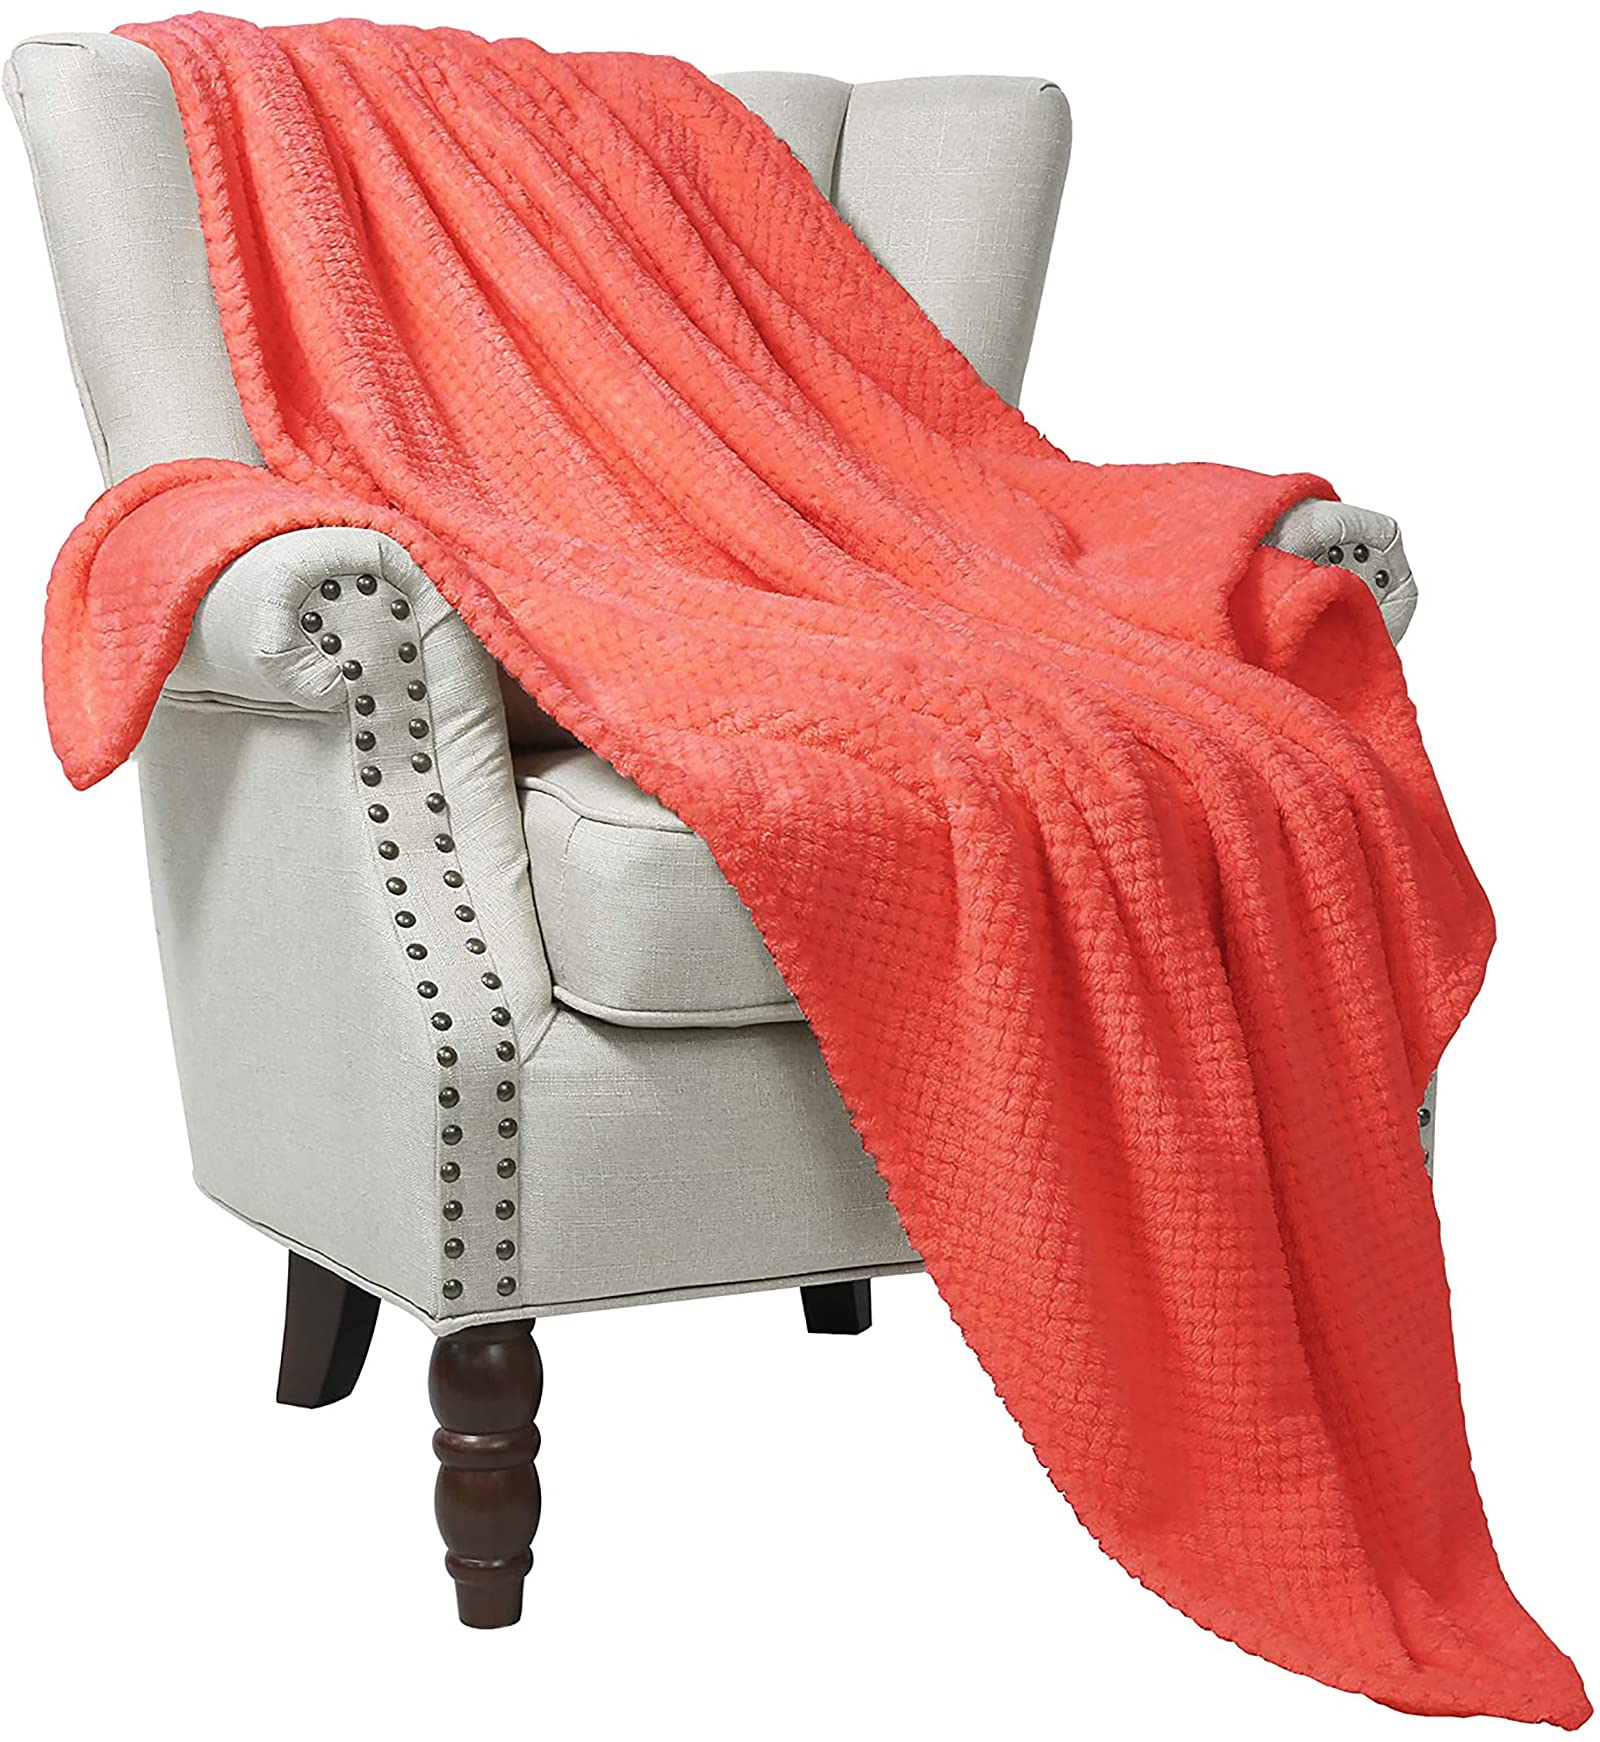 Book Cover Exclusivo Mezcla Waffle Textured Extra Large Fleece Blanket, Super Soft and Warm Throw Blanket for Couch, Sofa and Bed (Coral Orange, 50x70 inches)-Cozy, Fuzzy and Lightweight Coral Orange 50x70 IN